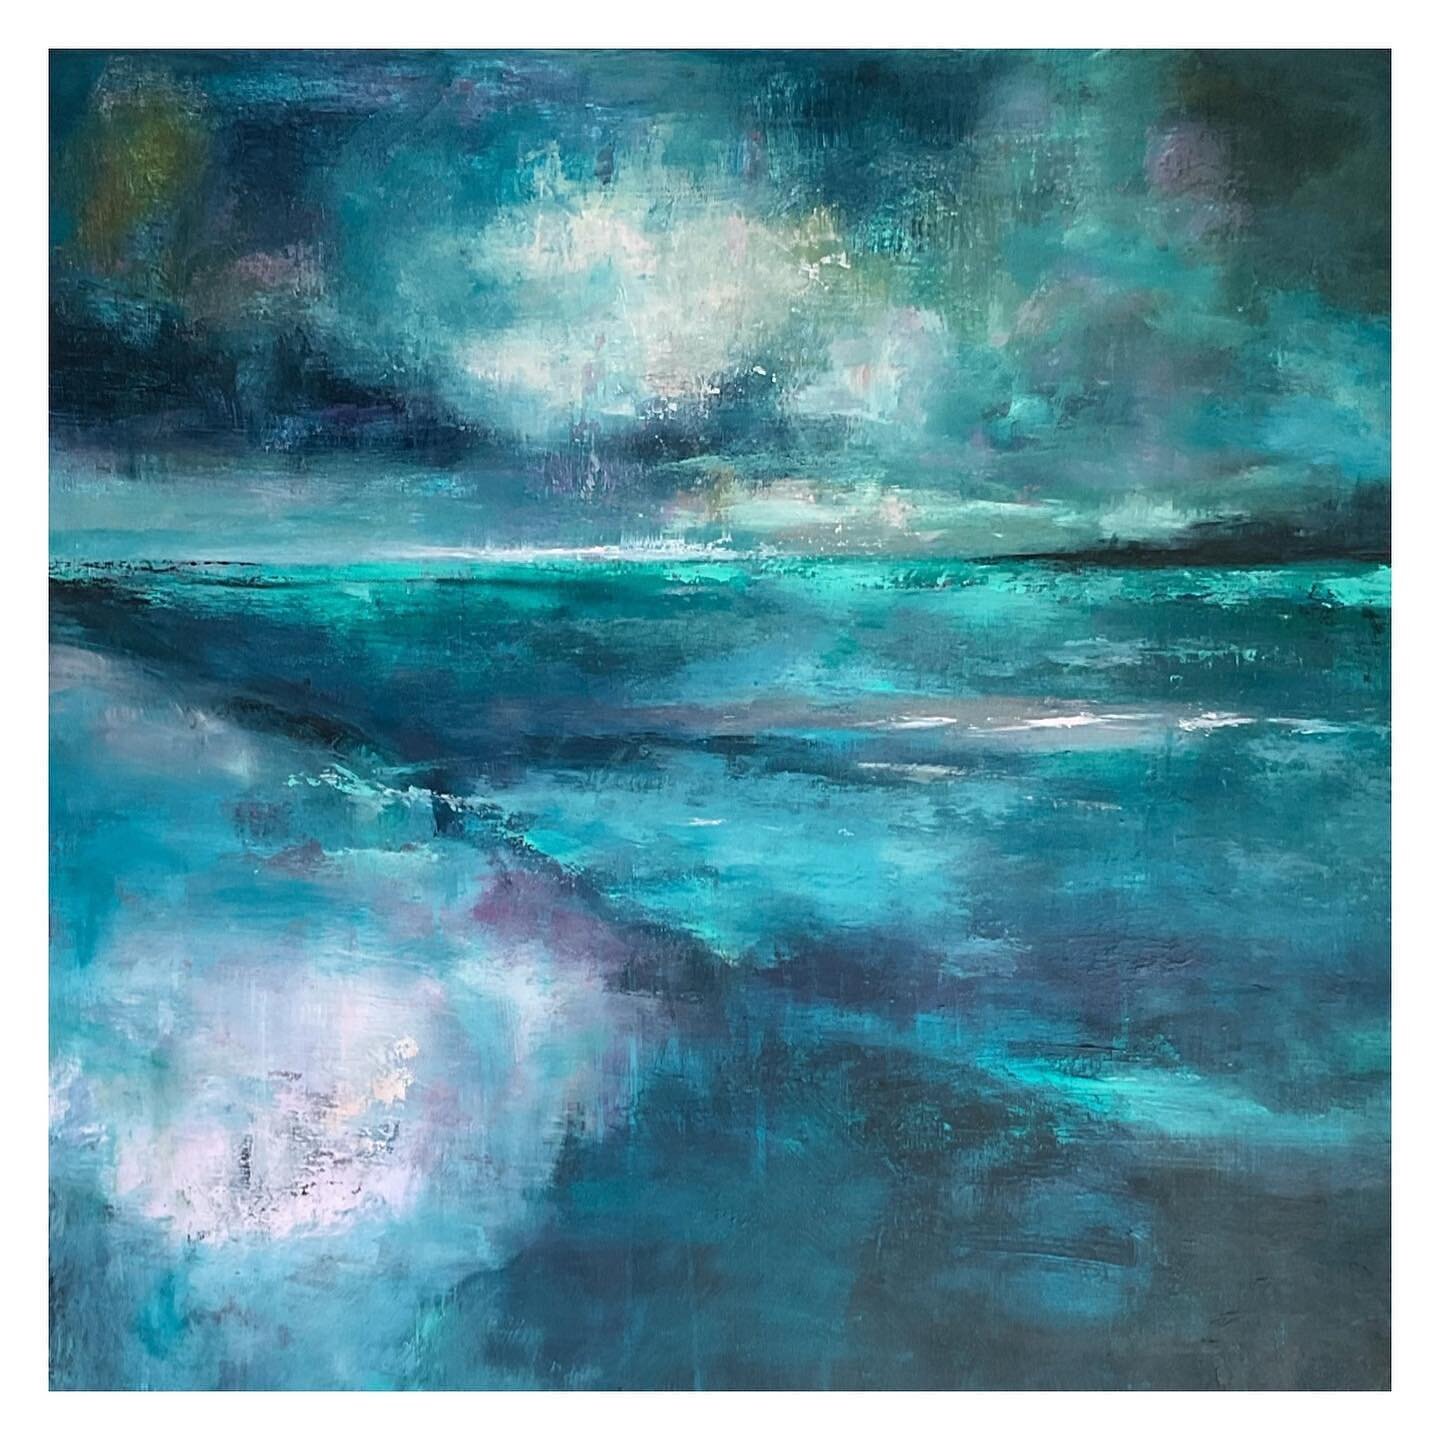 Moody Blues

DM me for purchase details
.
.
.
#abstractart #abstactpainting #seascape #seascapepainting #artforsale #affordableart #moodyblues #theocean #calmness #turquoisewater #sitges #cassis